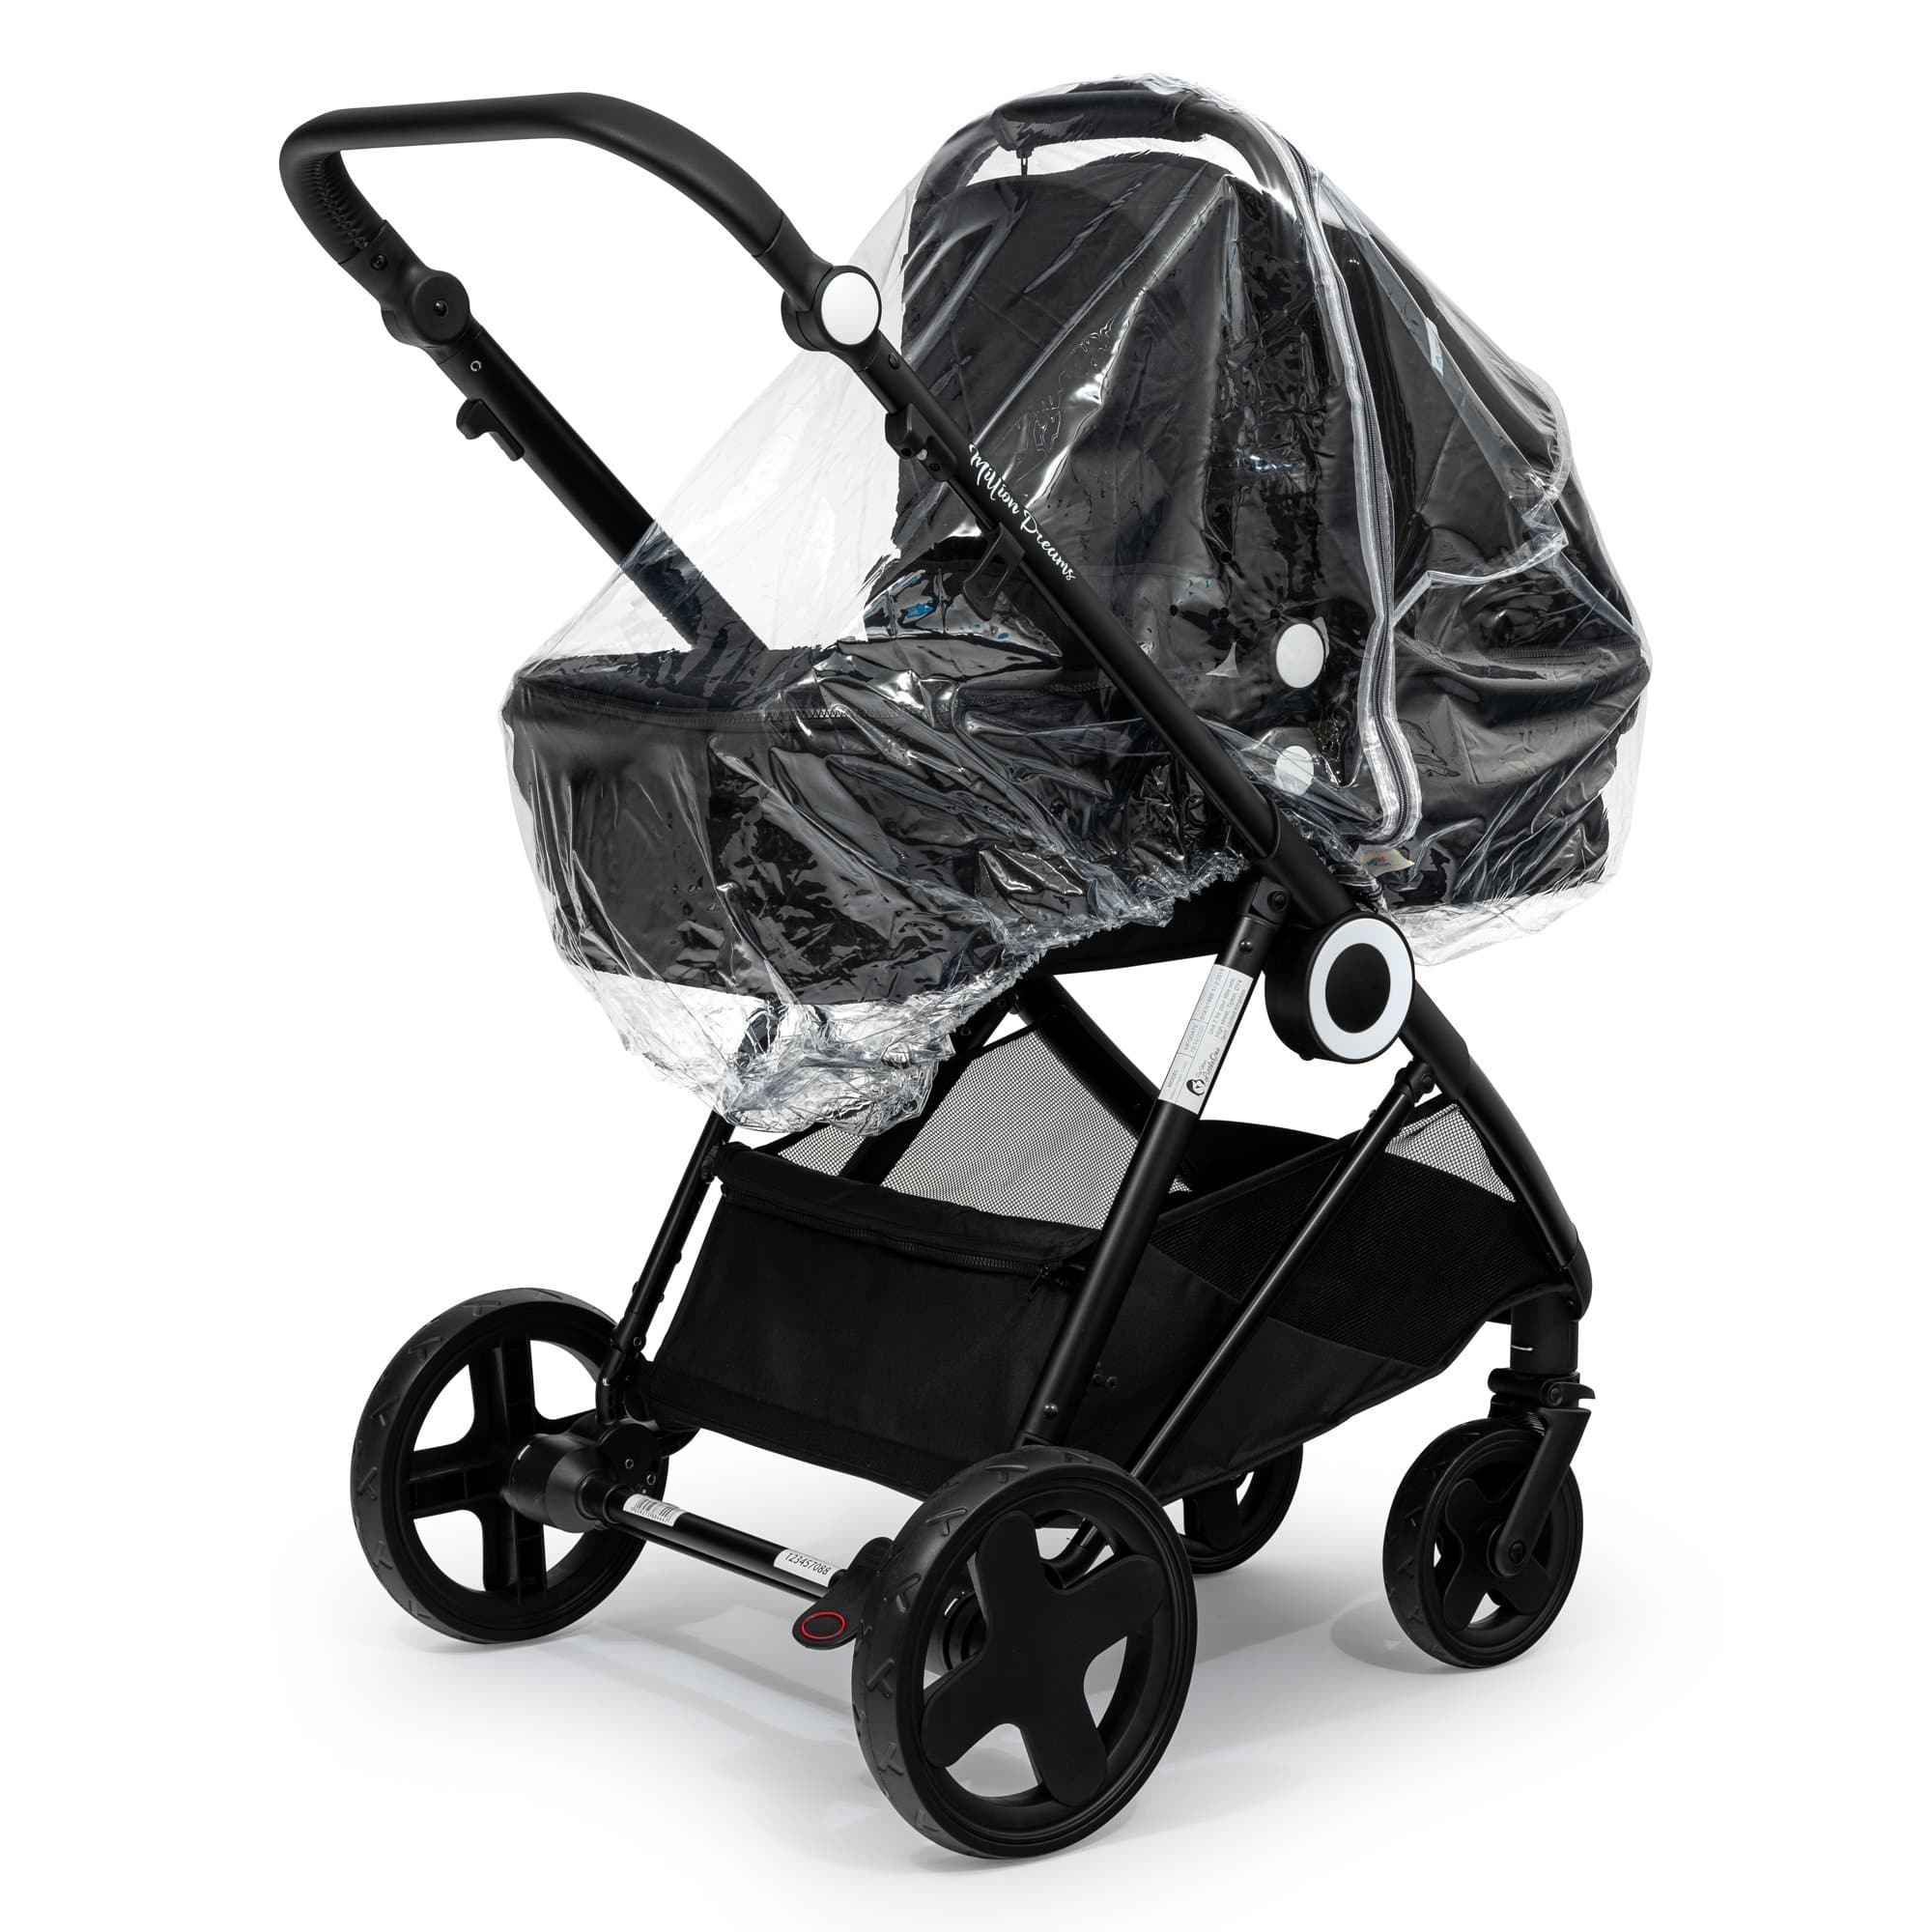 2 in 1 Rain Cover Compatible with Hartan - Fits All Models - For Your Little One